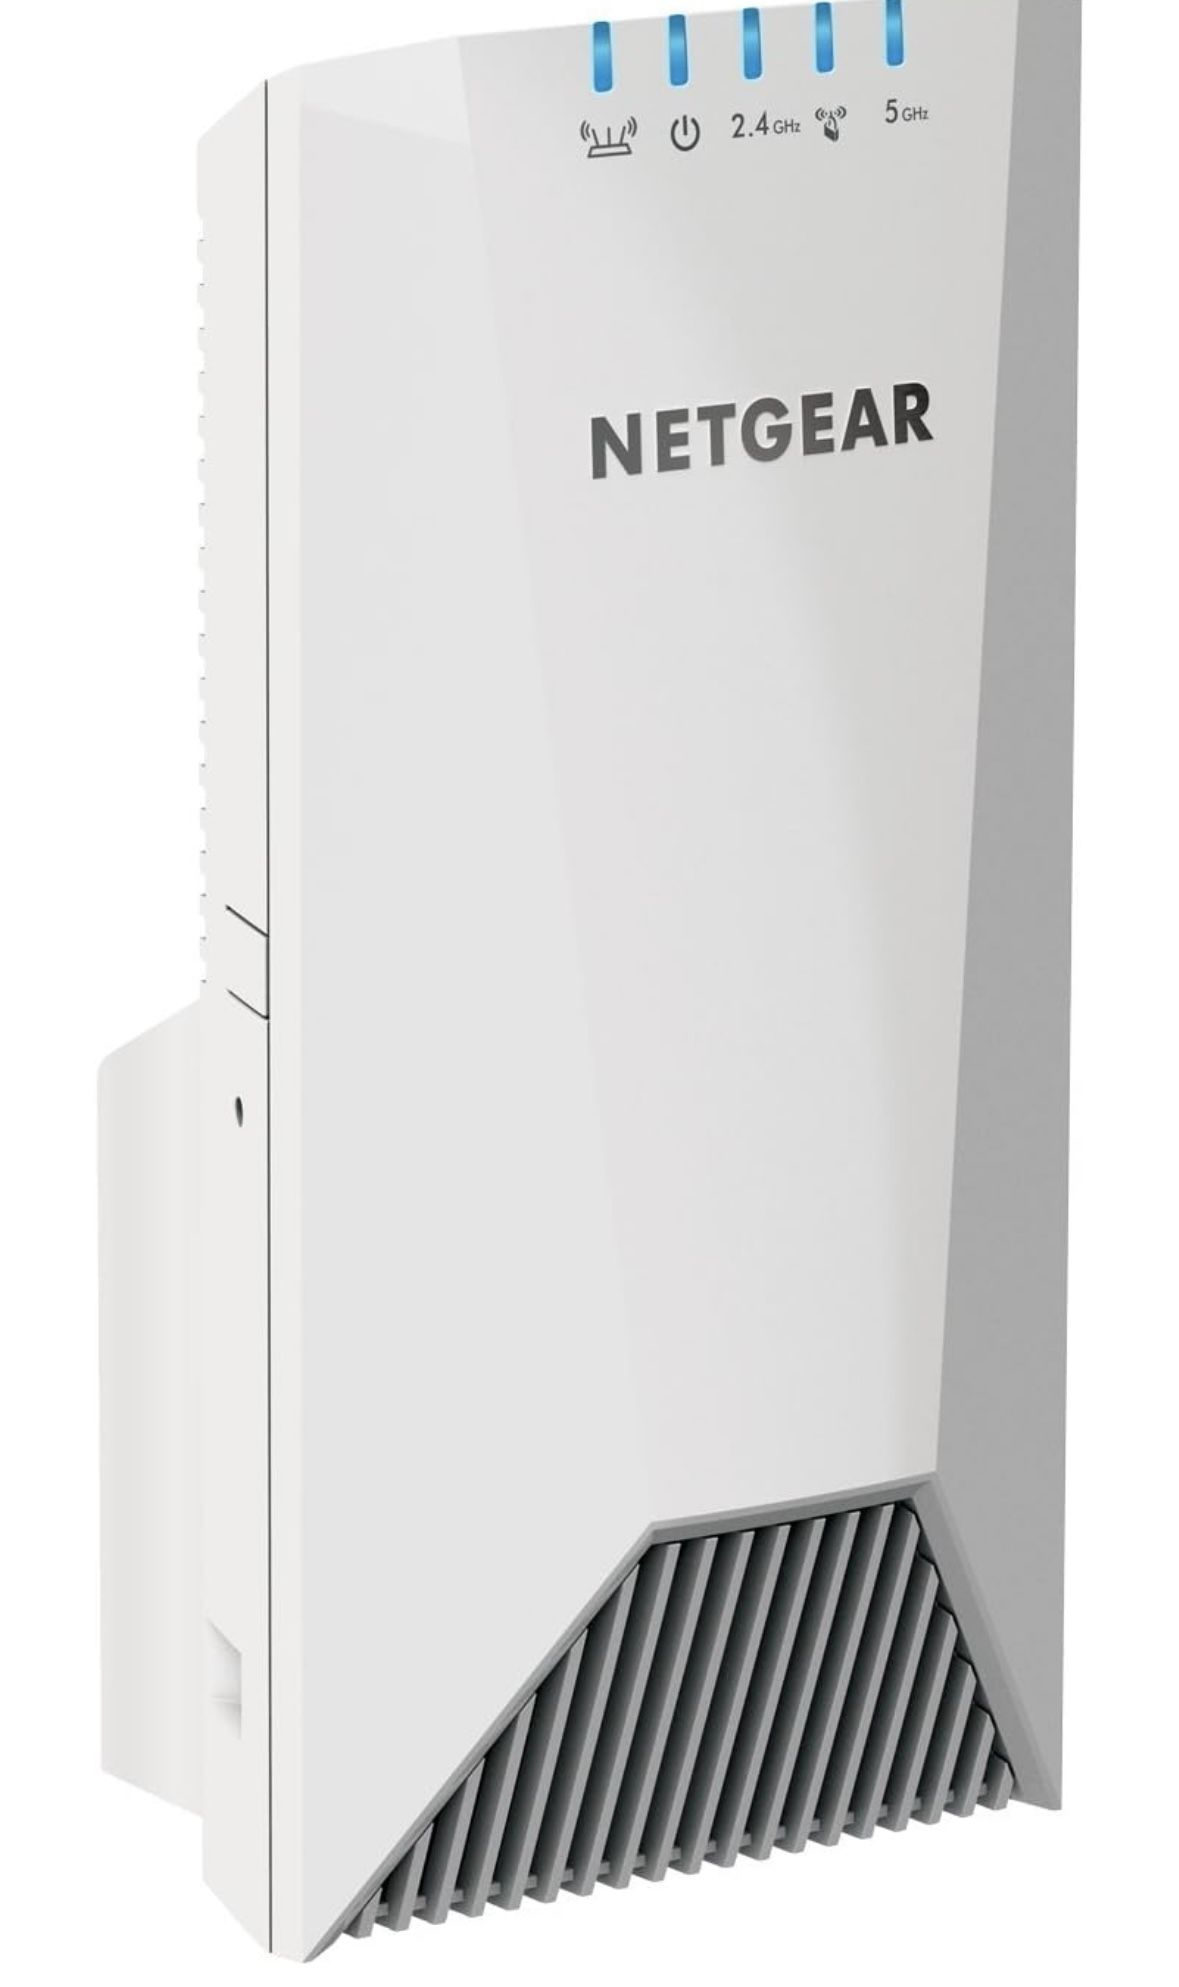 NETGEAR WiFi Mesh Range Extender EX7500 - Coverage up to 2300 sq.ft. and 45 devices with AC2200 Tri-Band Wireless Signal Booster & Repeater (up to 220